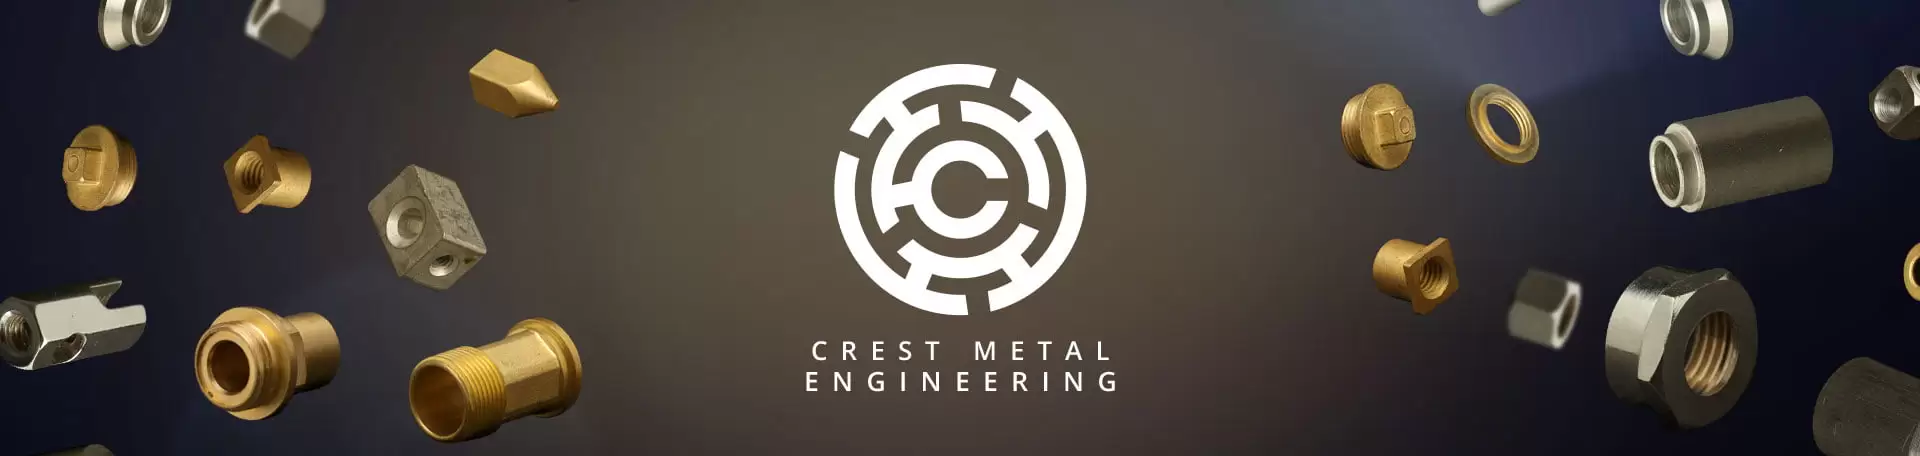 Case Study of Crest Metal Engineering by a Brand Management Agency.